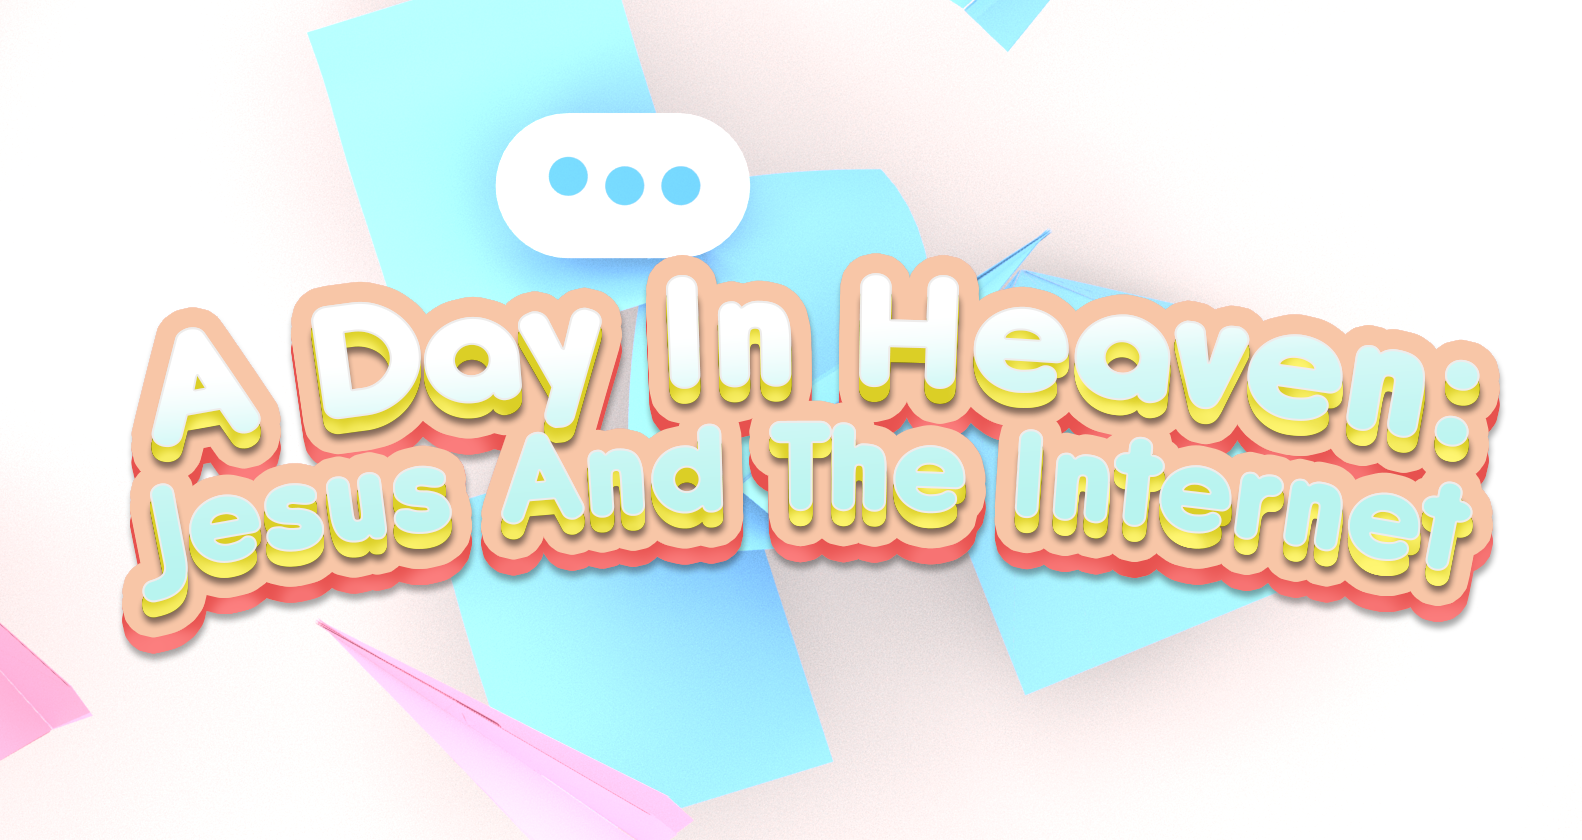 A Day In Heaven: Jesus And The Internet